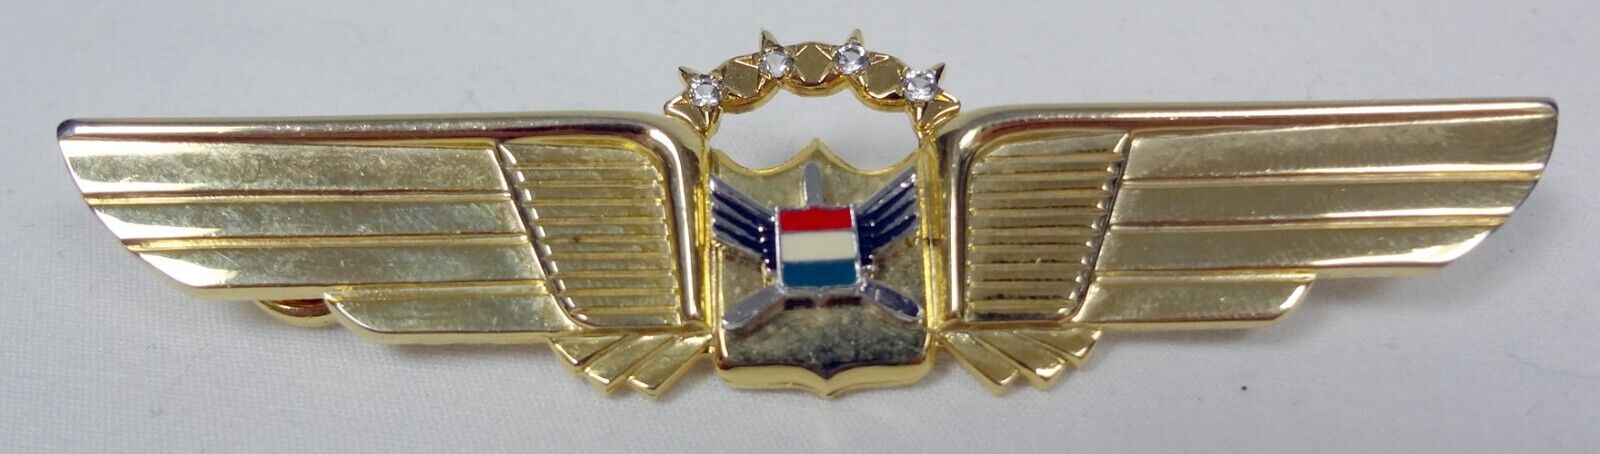 RARE 4 Star Stone Gold United States Airline Pilots Pin